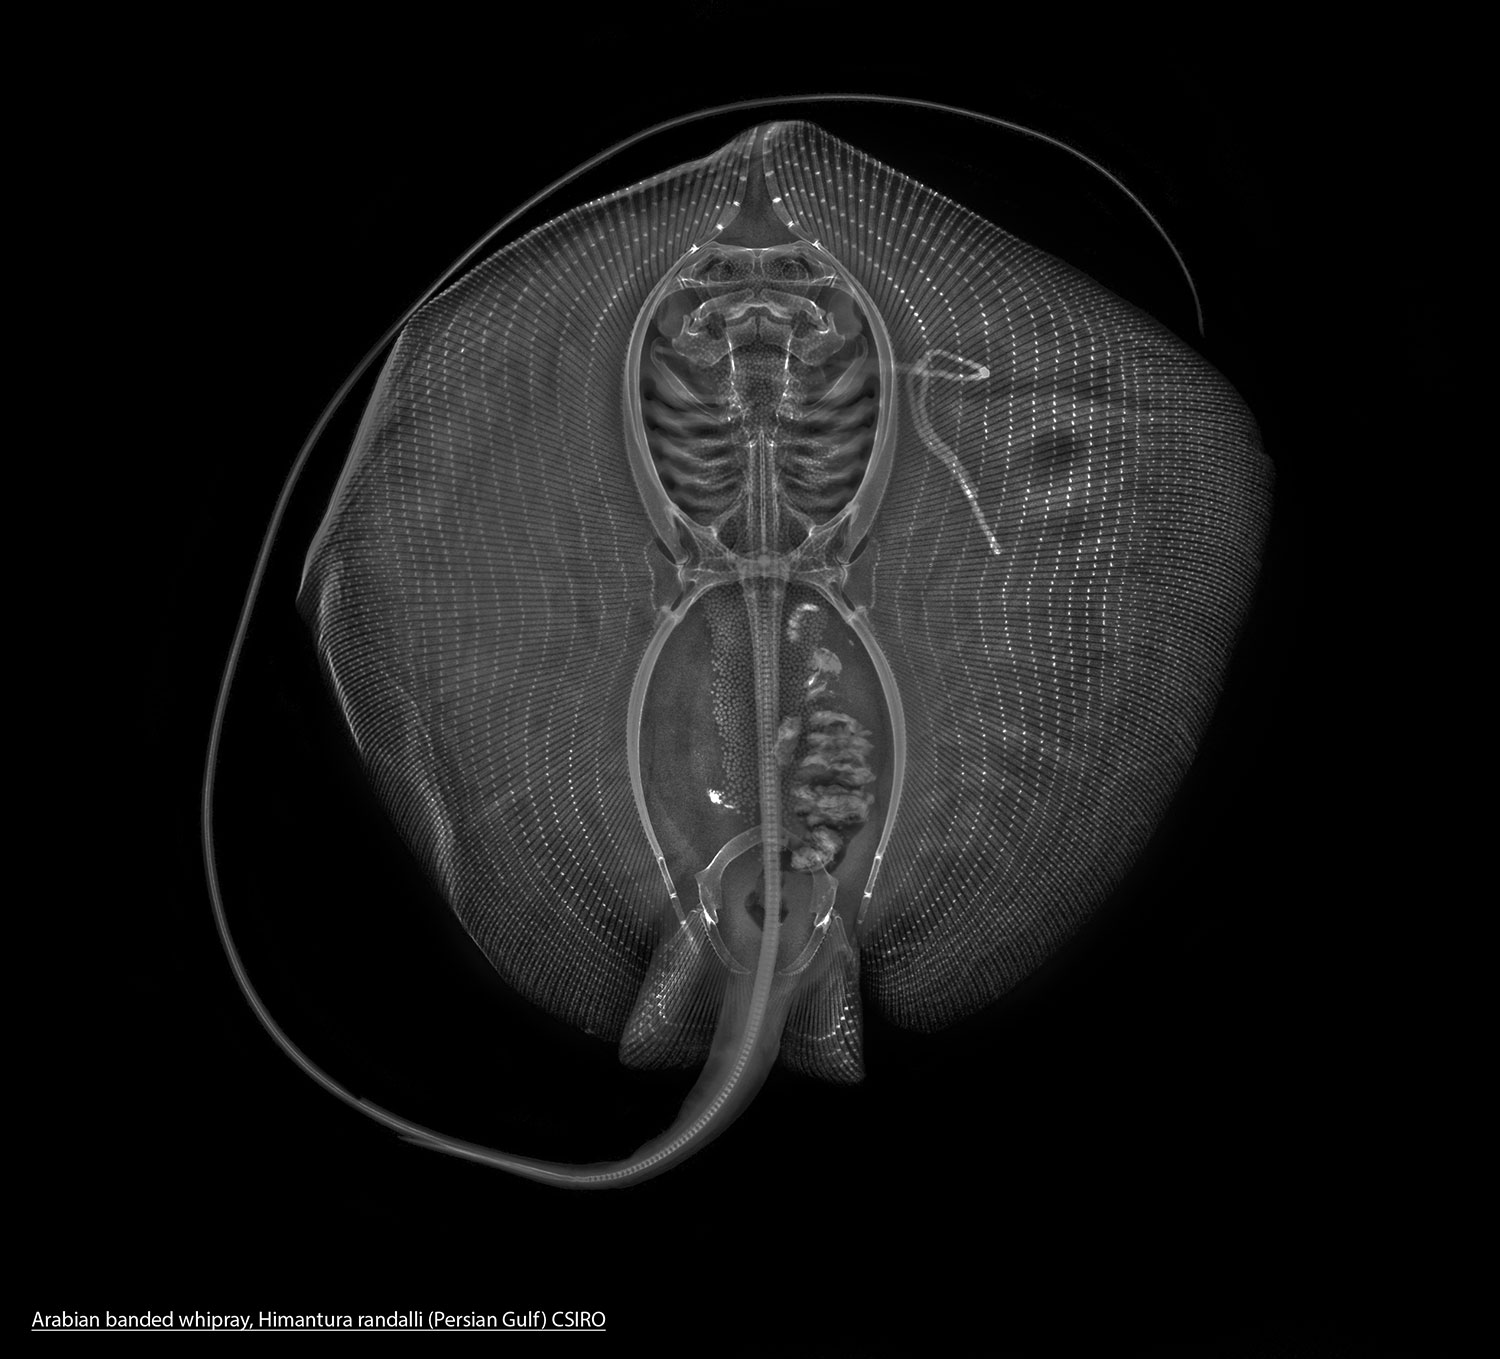 Digital X-ray of the Arabian banded whipray. Digital X-rays have a much larger tonal range than previous film X-rays.